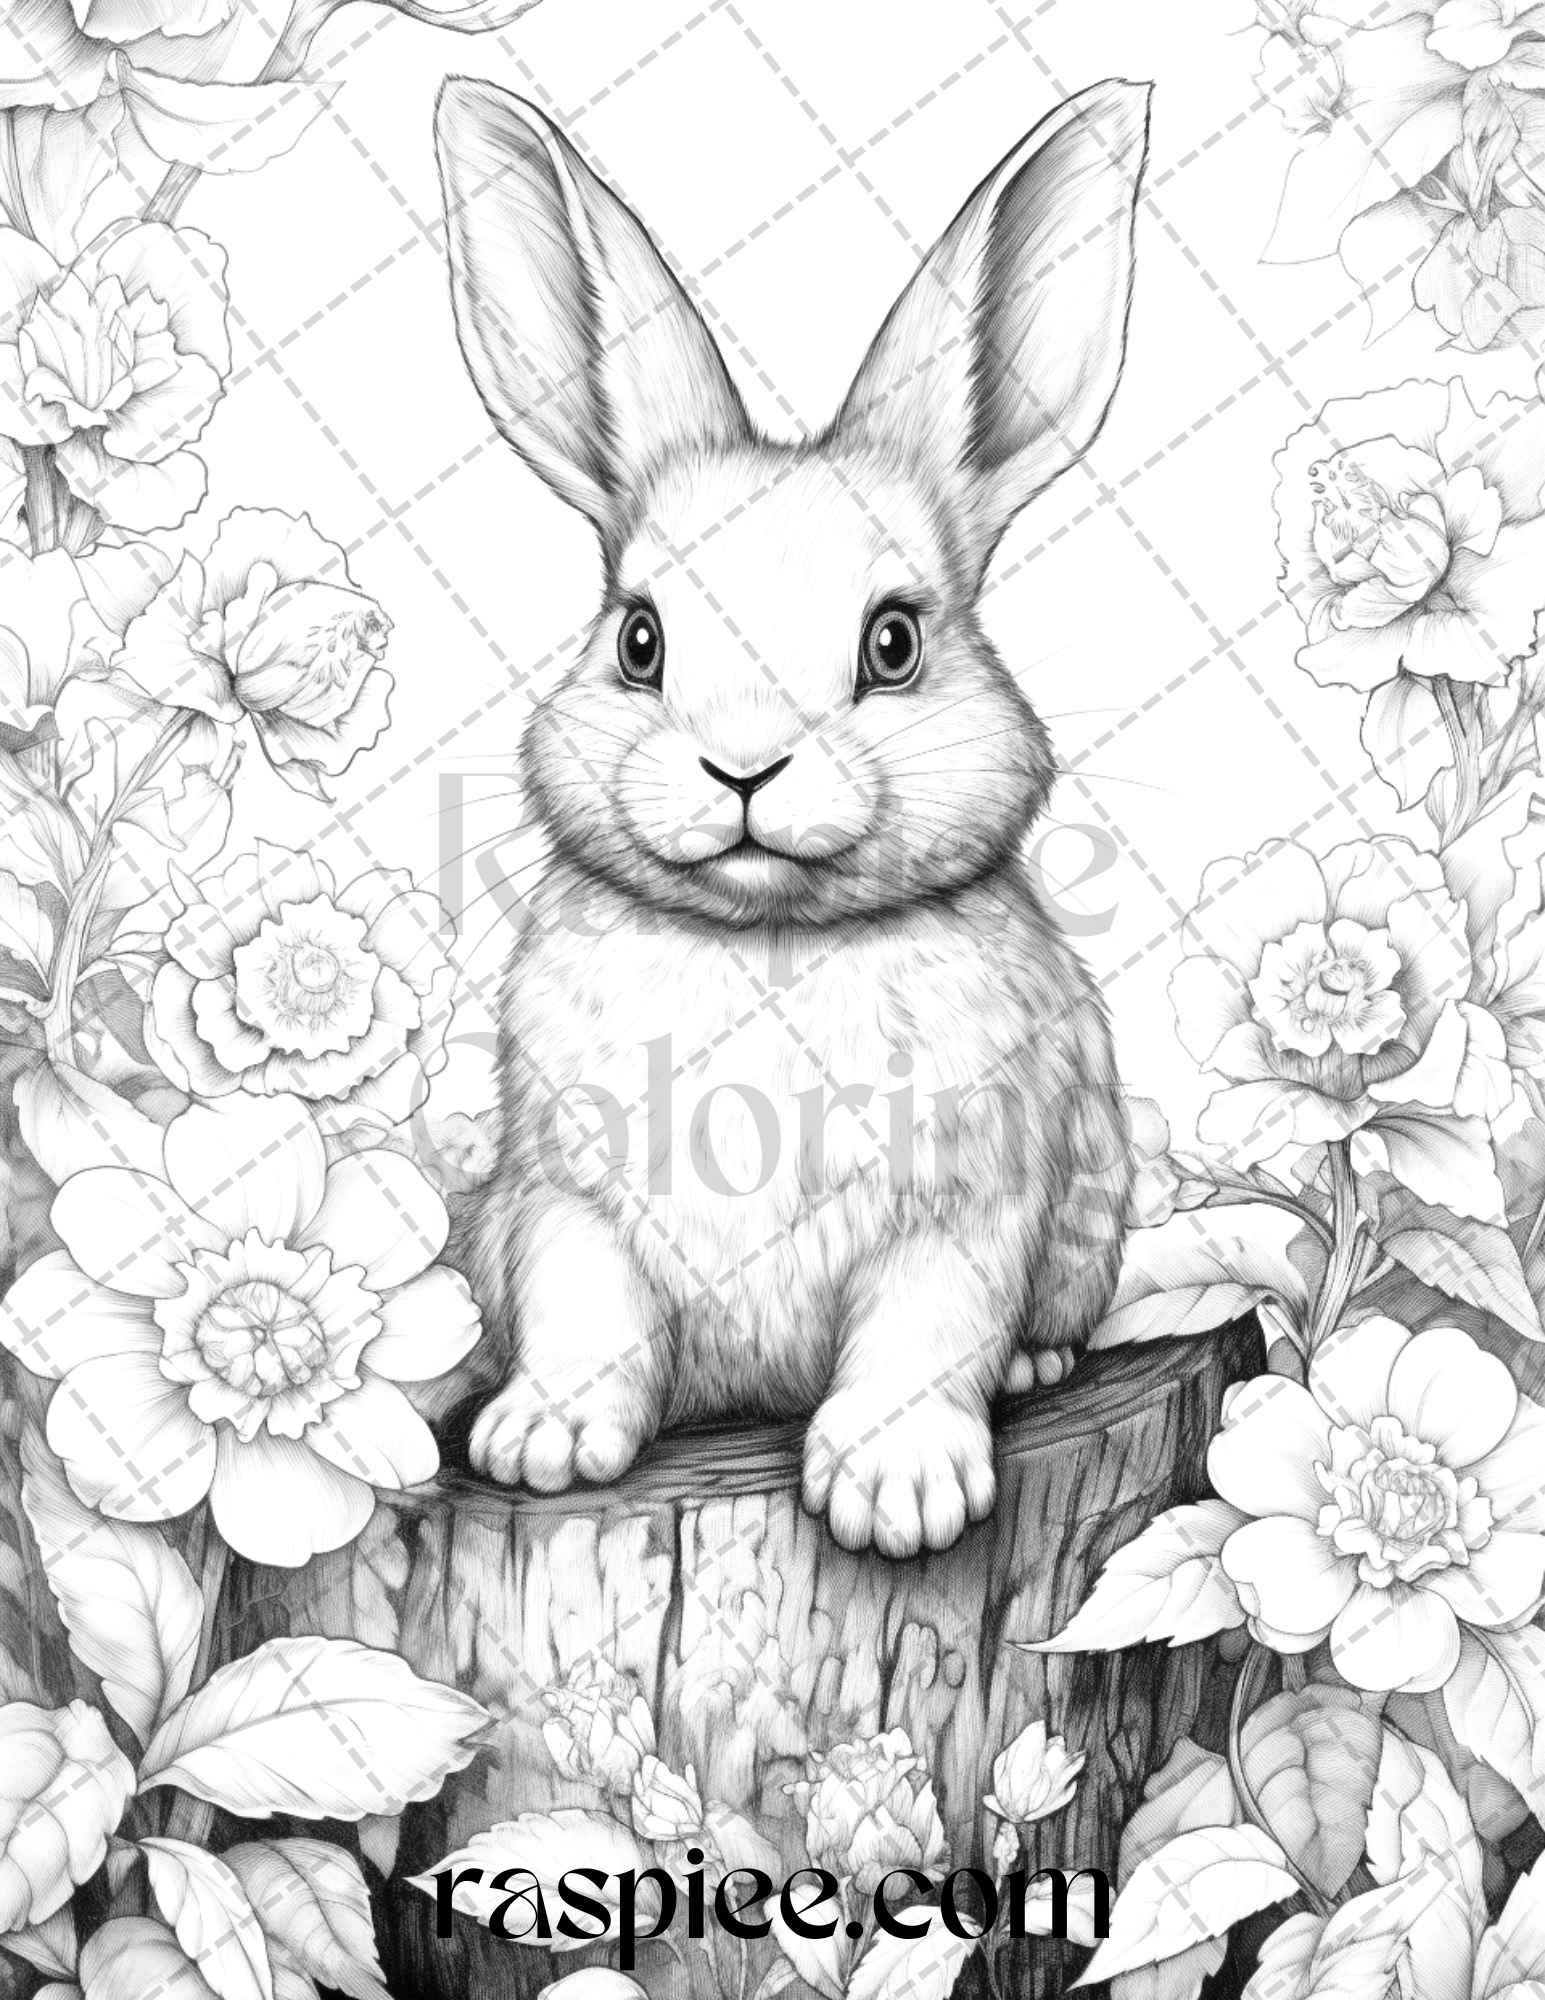 Rabbit Garden Grayscale Coloring Page, Adult Coloring Page Printable, Detailed Rabbit Art for Coloring, Animal Coloring Page for Adults